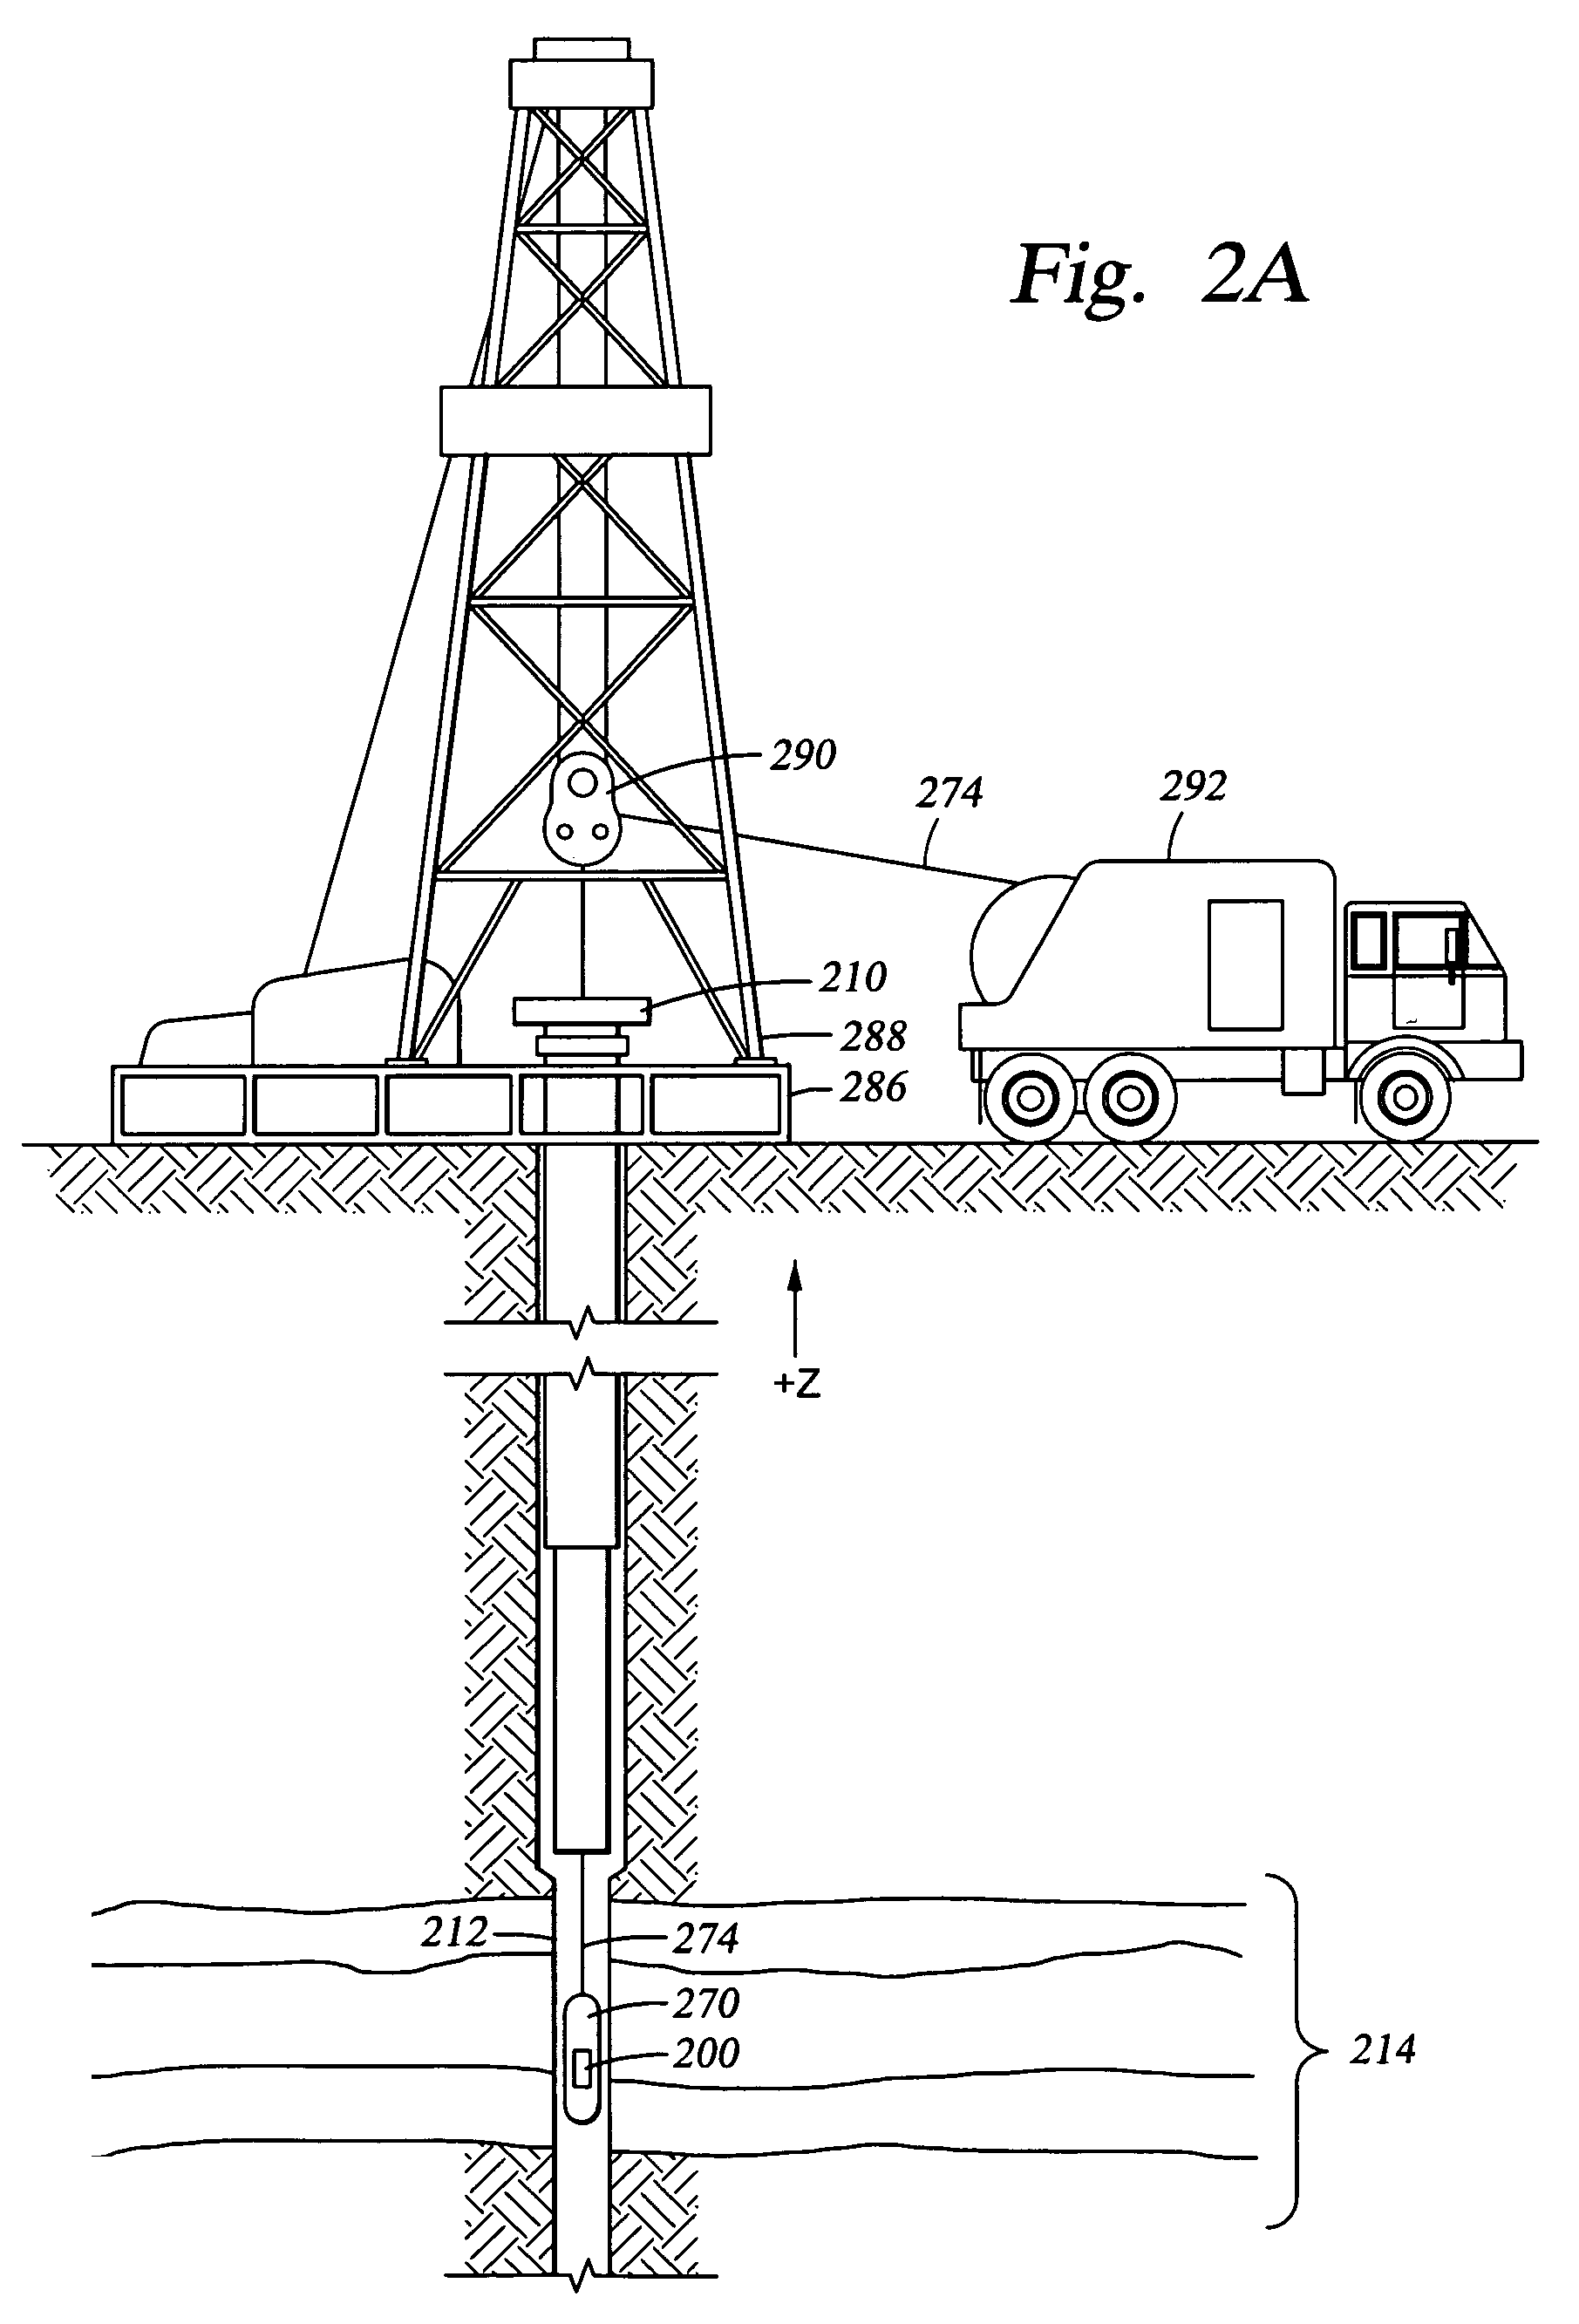 Shunt regulation apparatus, systems, and methods